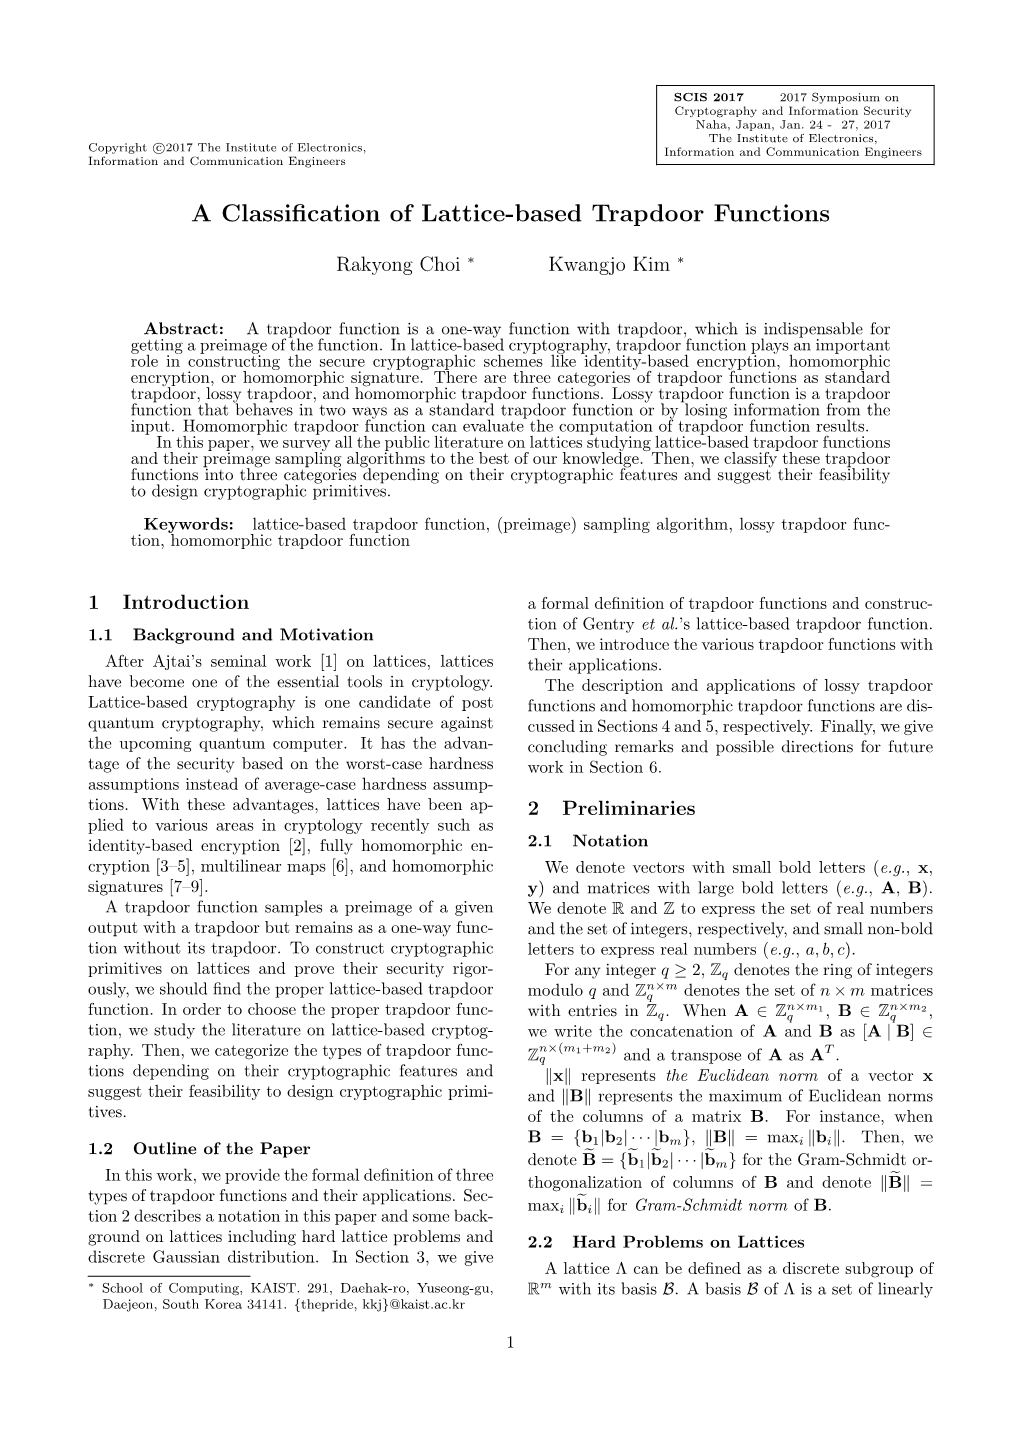 A Classification of Lattice-Based Trapdoor Functions